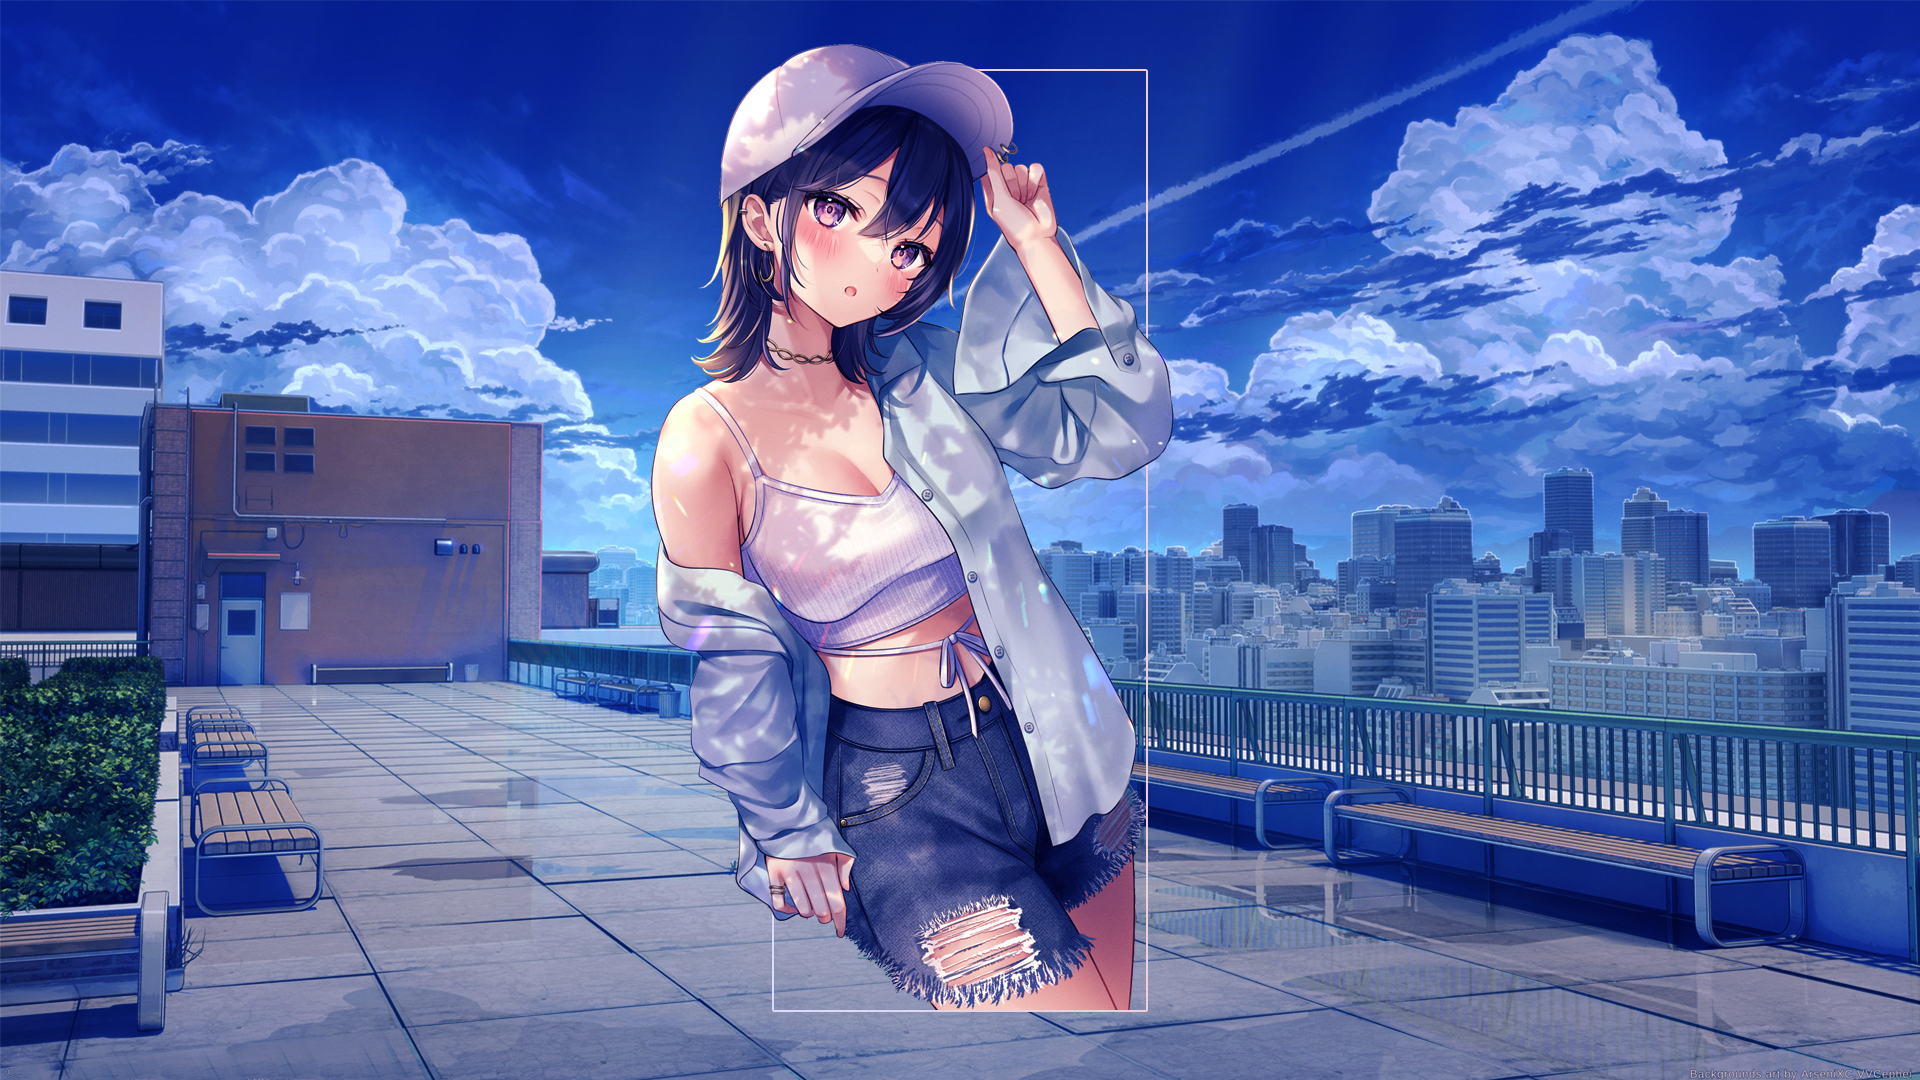 Anime 1920x1080 anime anime girls picture-in-picture abstract landscape digital art